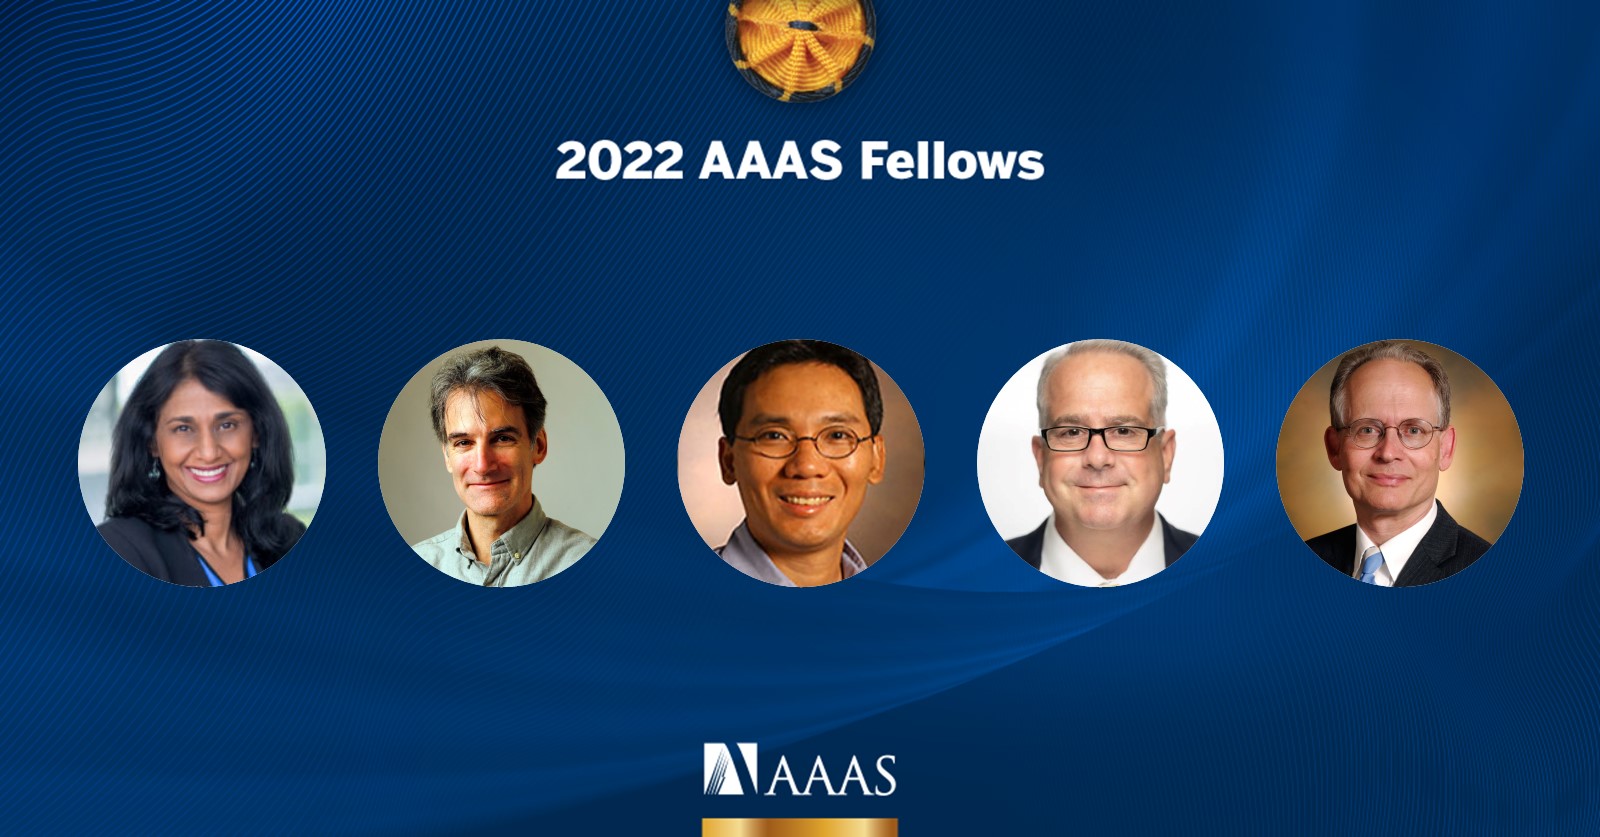 Five Vanderbilt faculty elected as 2022 American Association for the Advancement of Science fellows